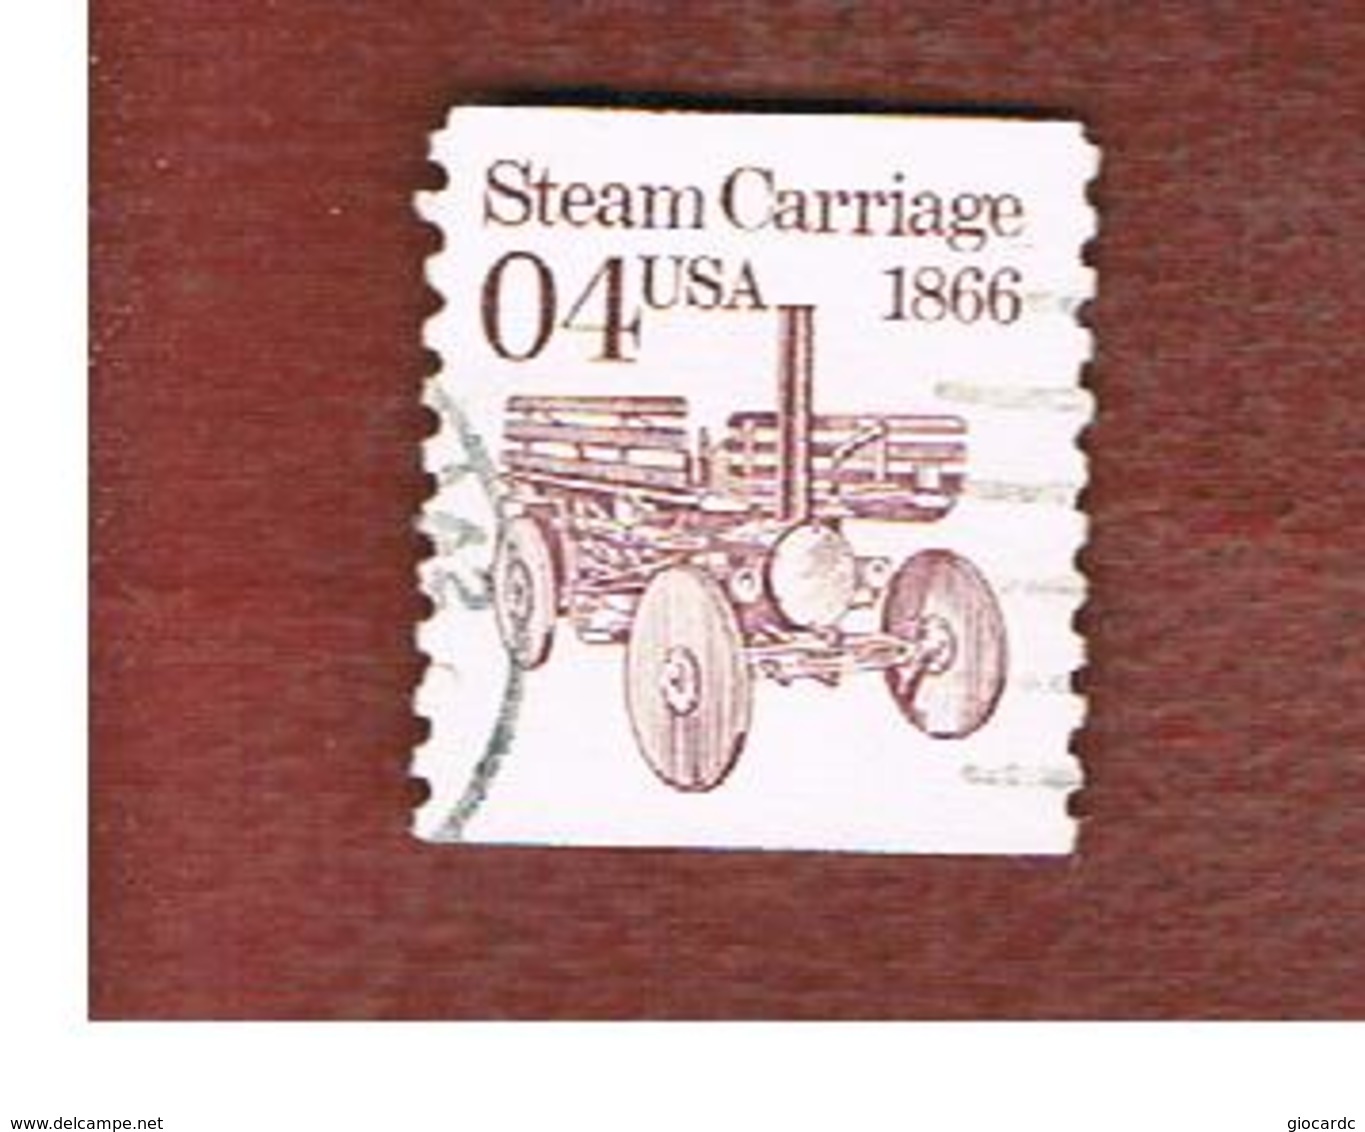 STATI UNITI (U.S.A.) - SG 2477 - 1991 TRANSPORT: STEAM CARRIAGE  - USED - Used Stamps